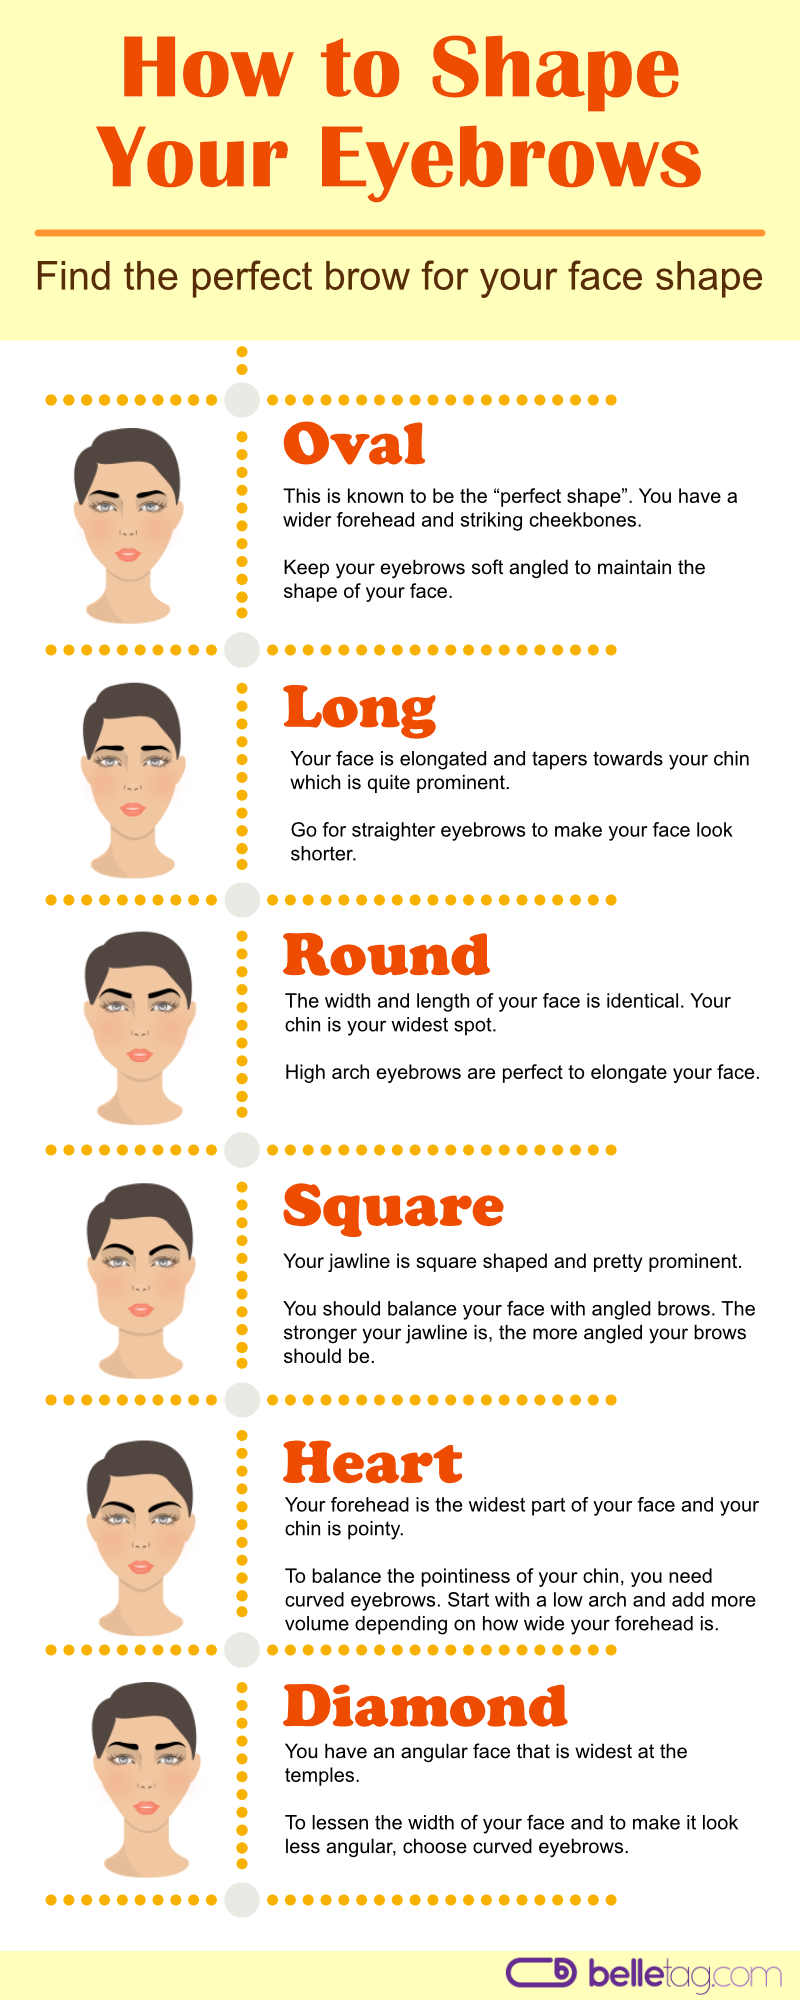 Find out which eyebrows fits you better! This guide will help you to understand your face shape and choose YOUR perfect brows. #EyeBrow #FaceShape